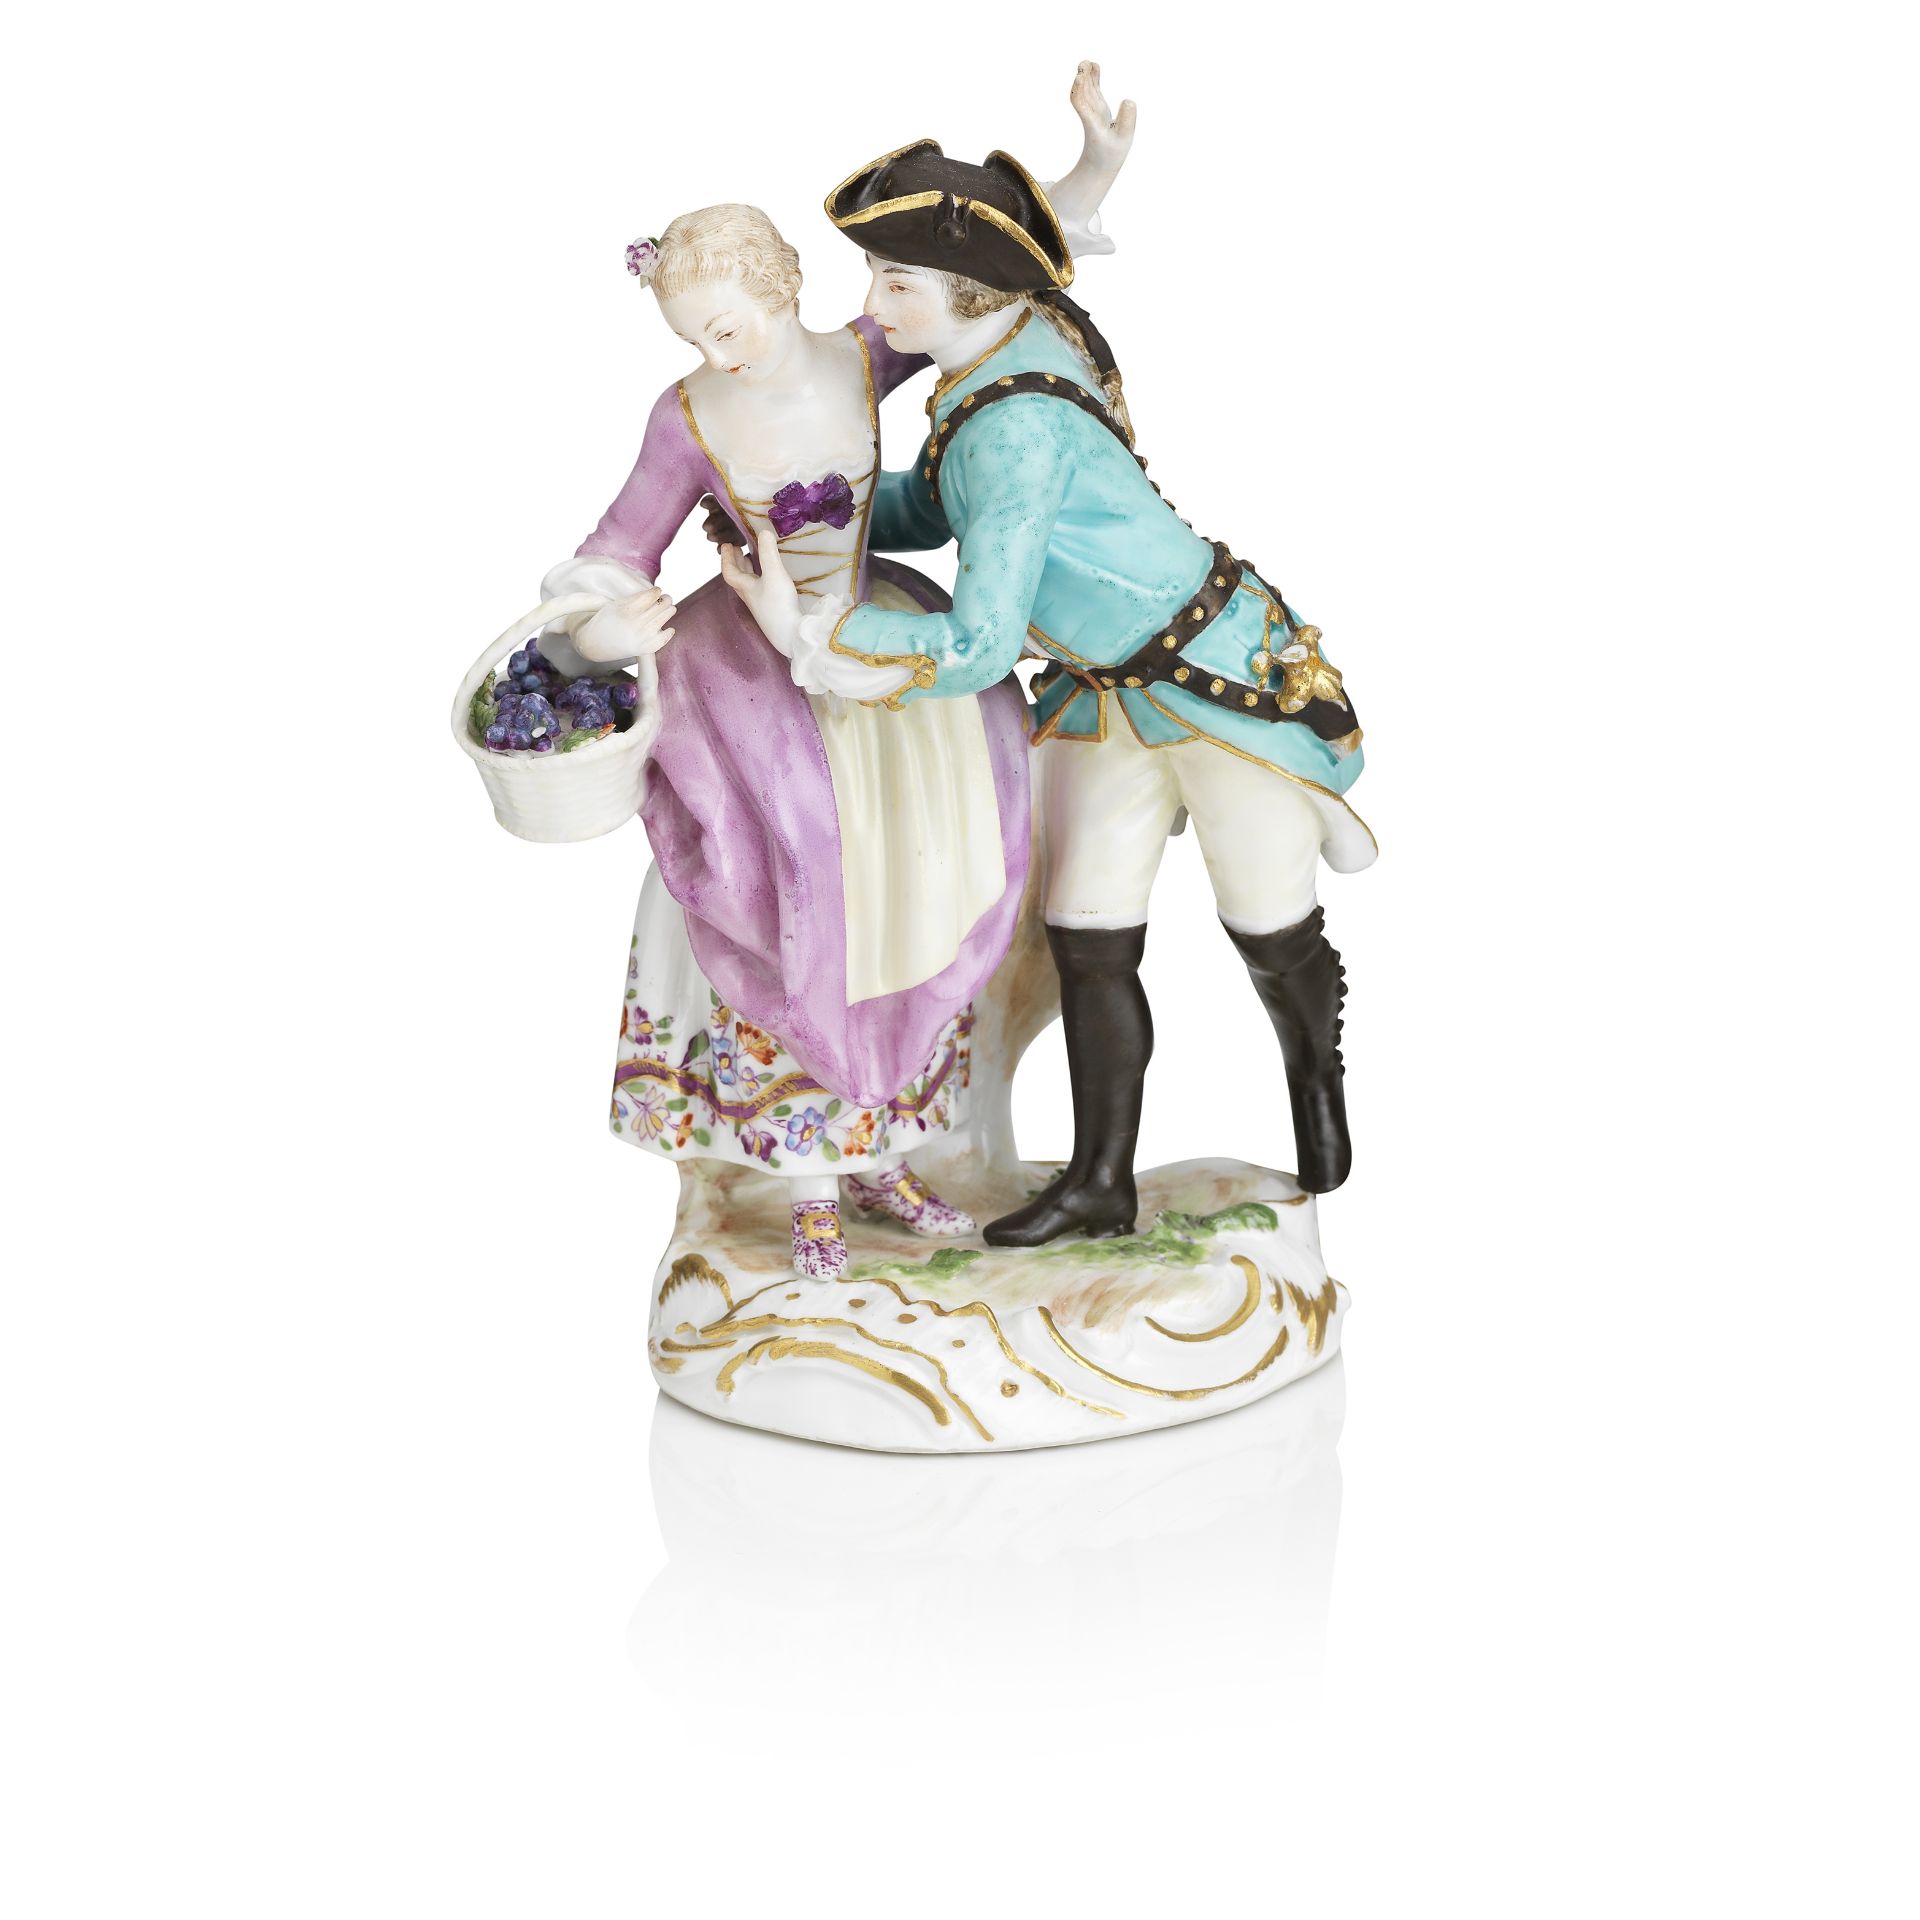 A Meissen figure group of a gallant couple 18th century, dot period